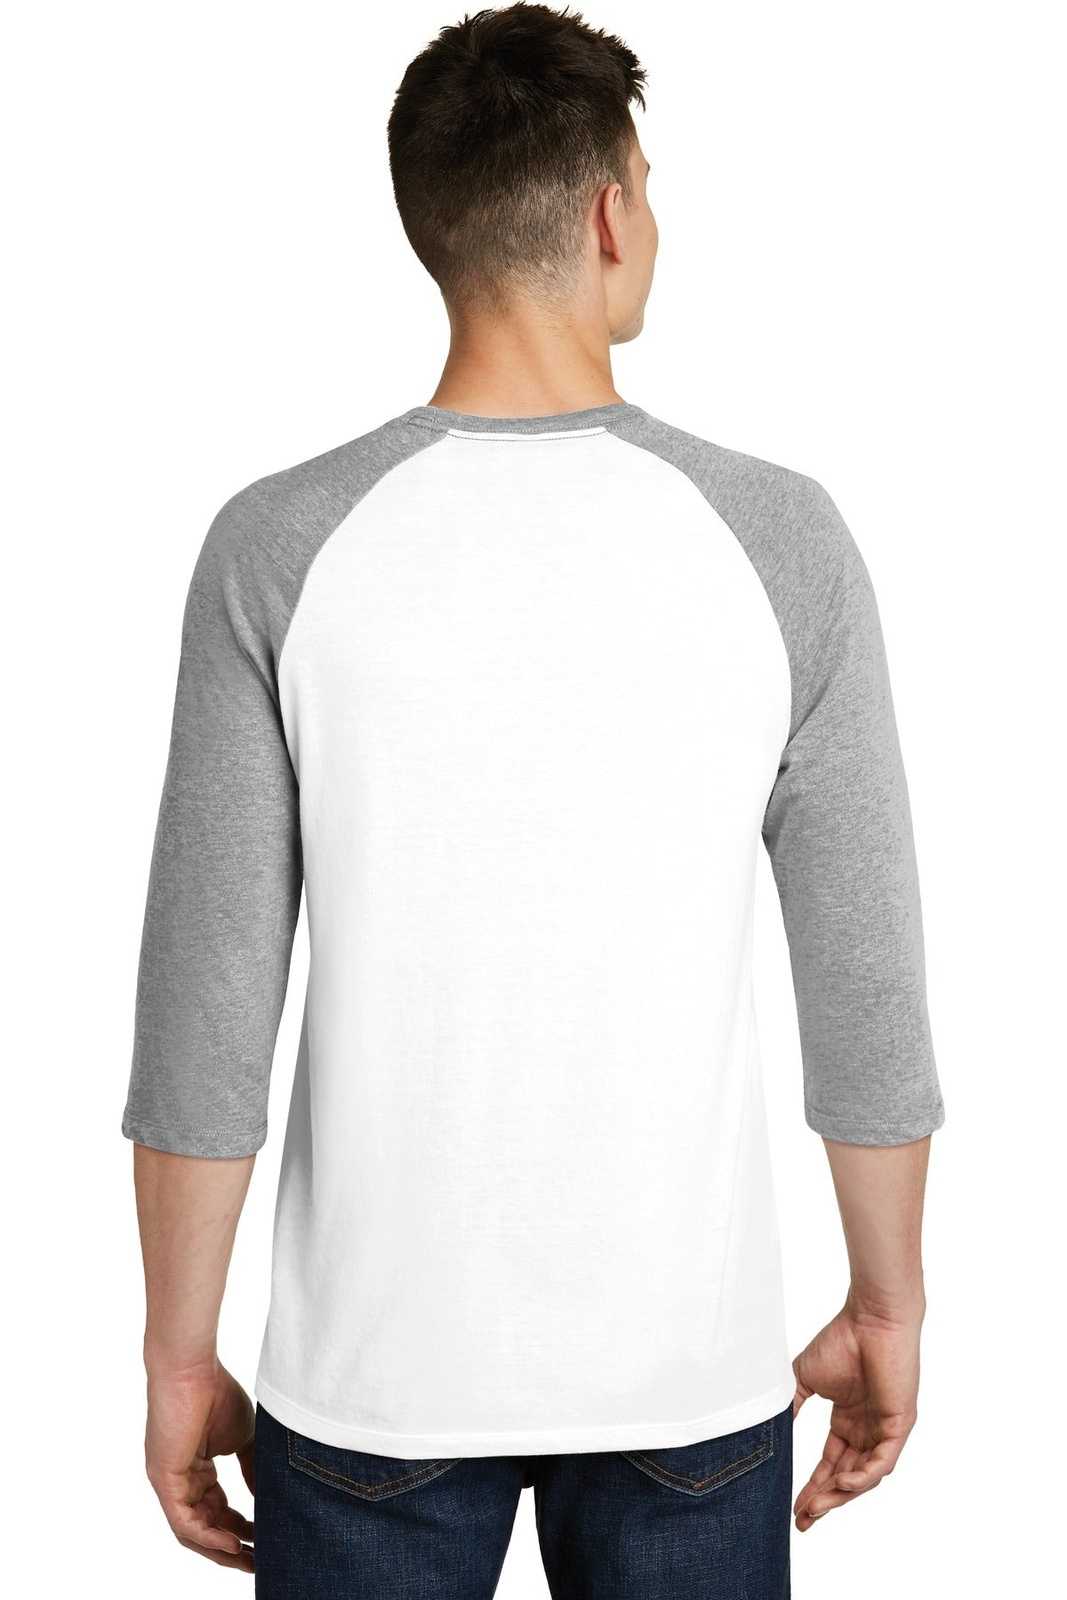 District DT6210 Very Important Tee 3/4-Sleeve Raglan - Light Heather Gray White - HIT a Double - 1